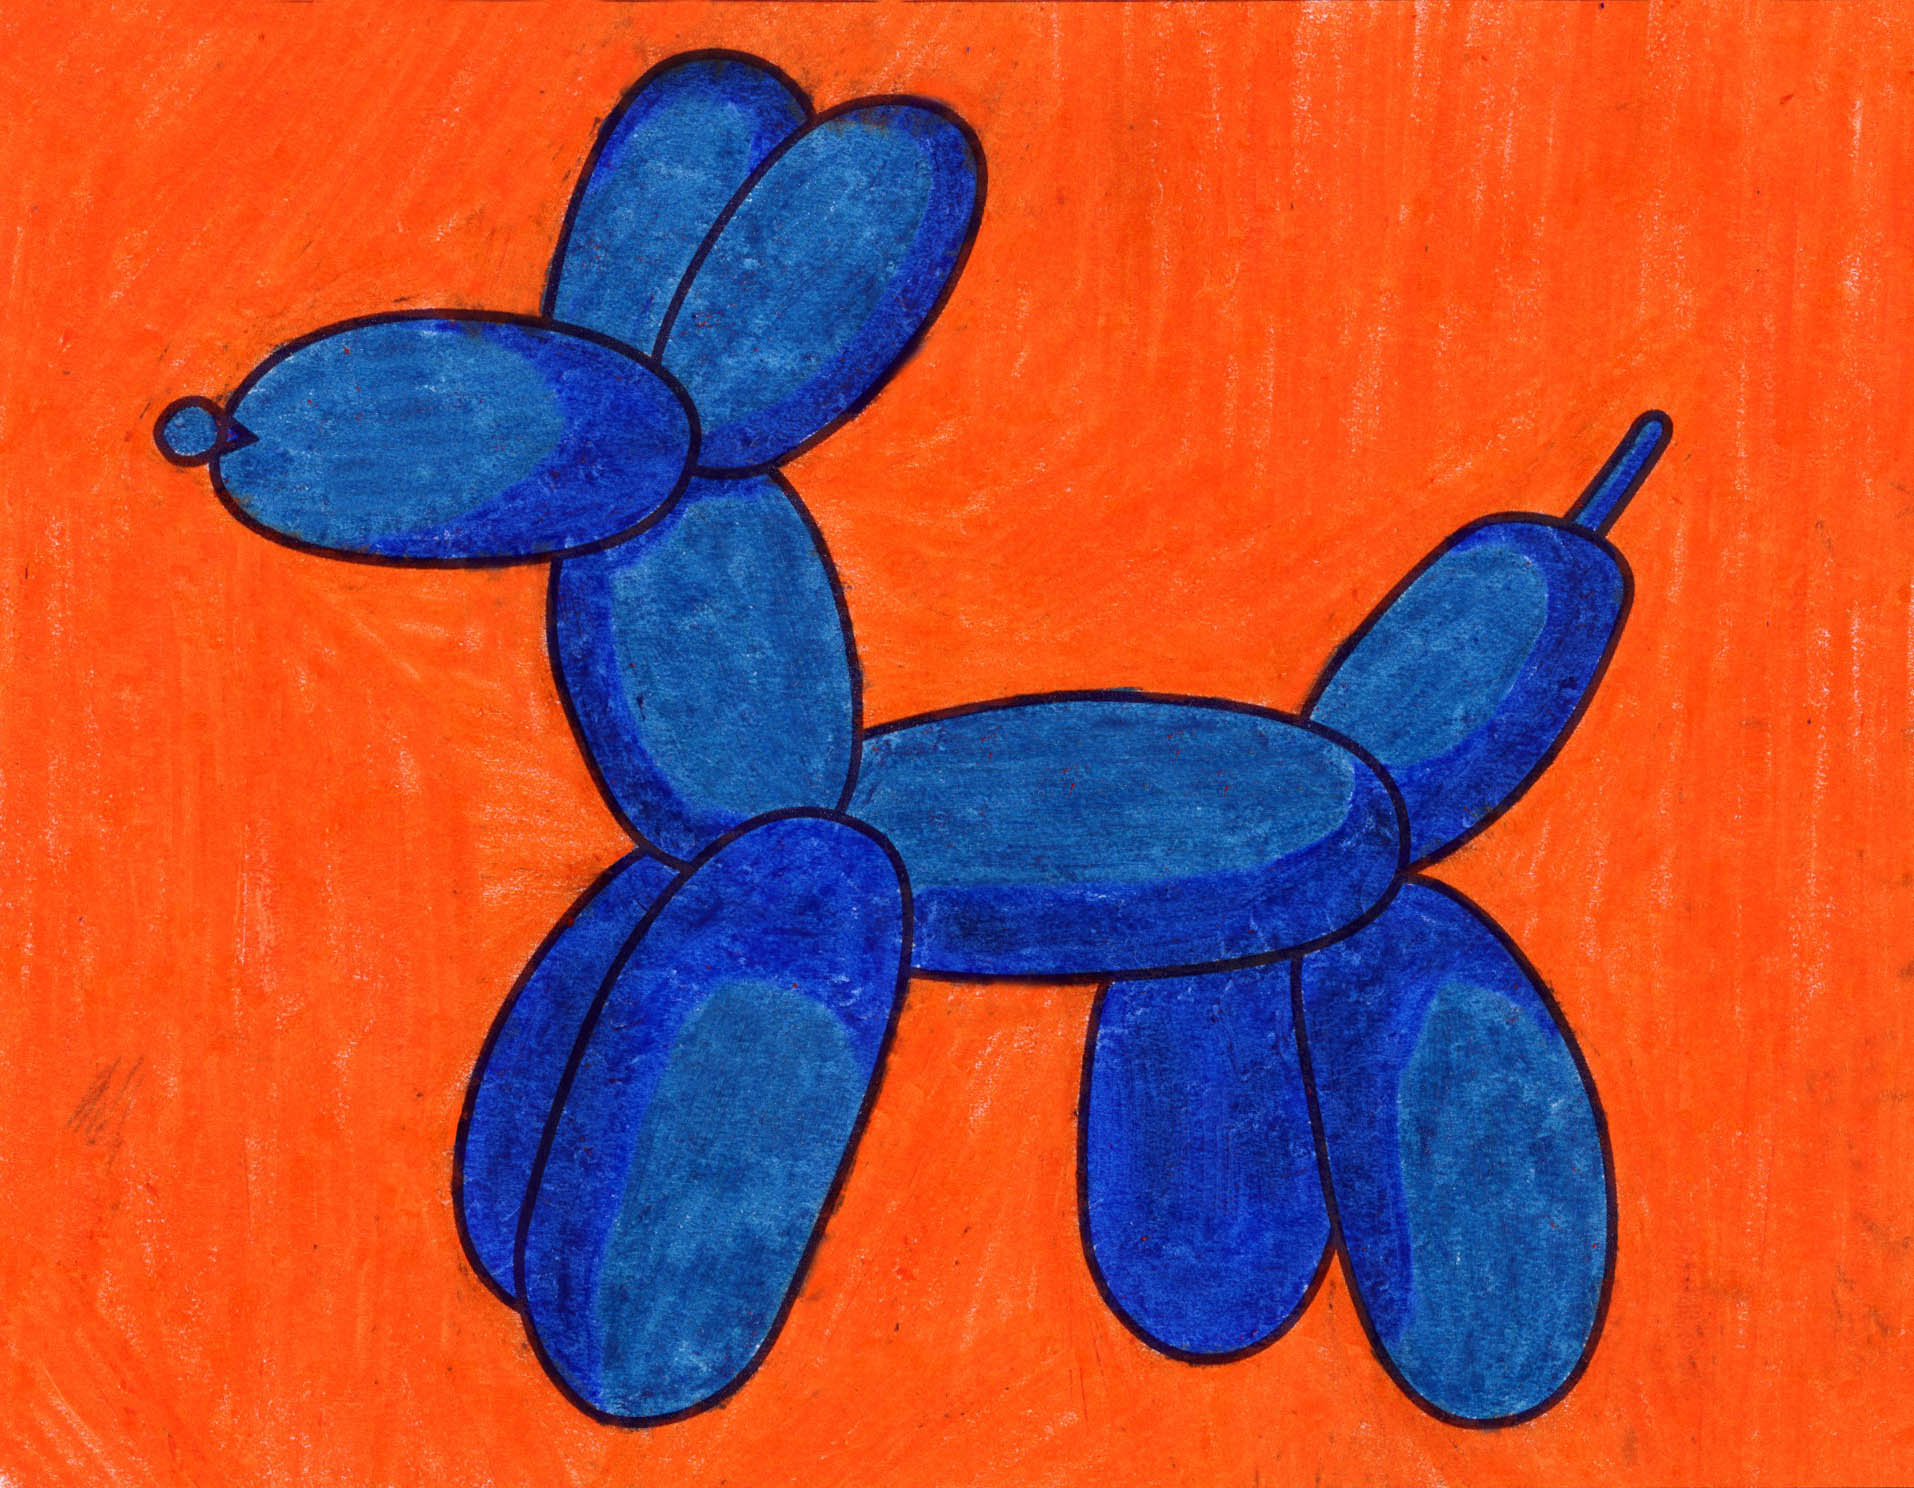 Easy How to Draw a Balloon Dog Tutorial and Balloon Dog Tutorial · Art Projects for Kids